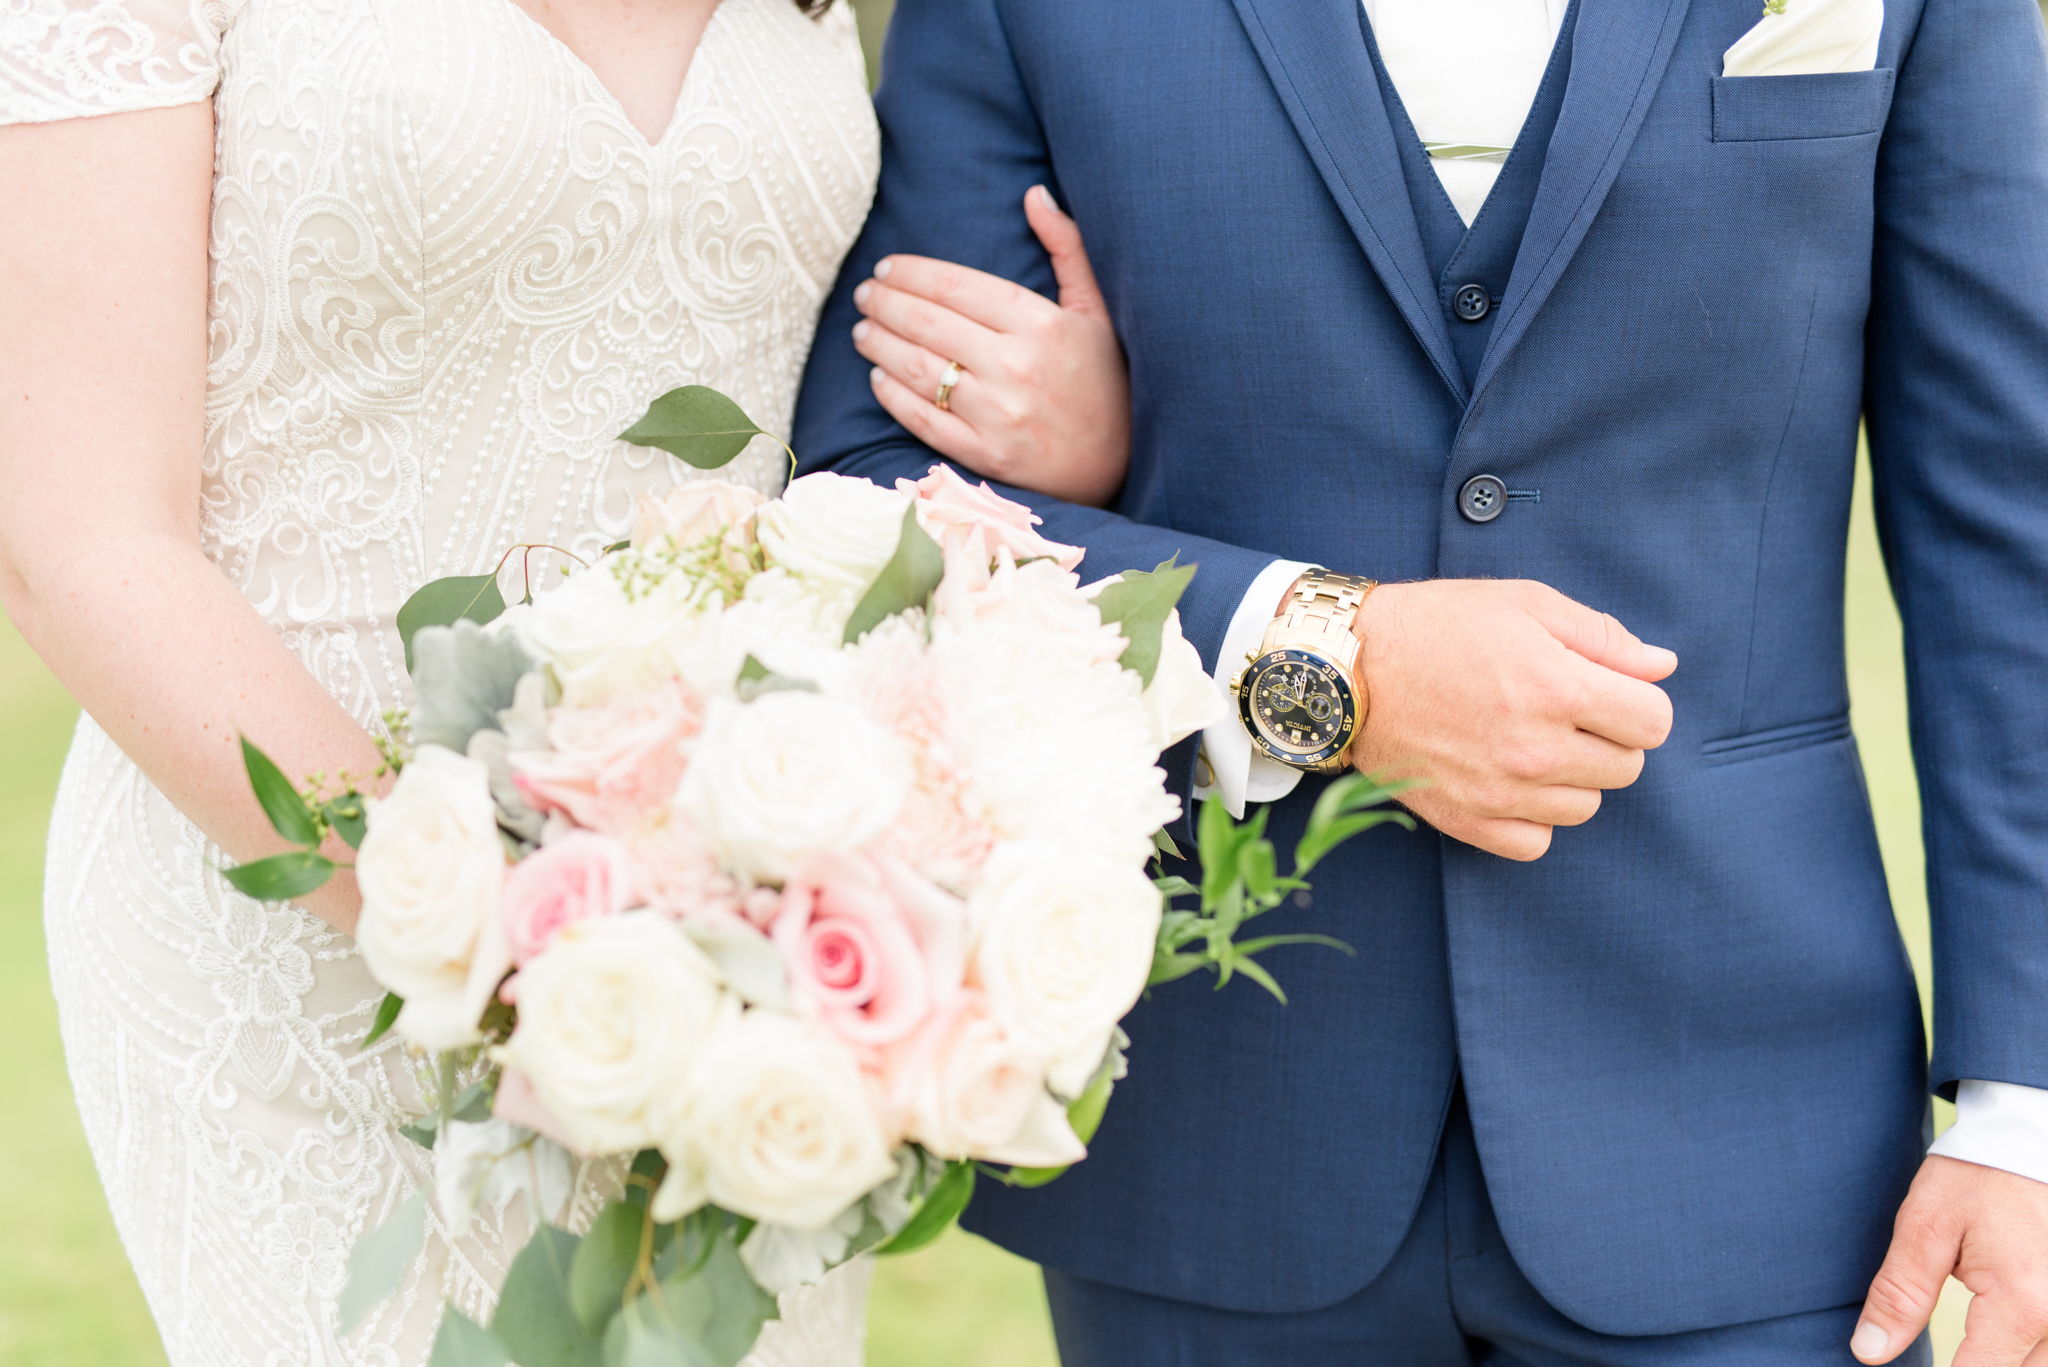 Grooms watch and bride's flowers.